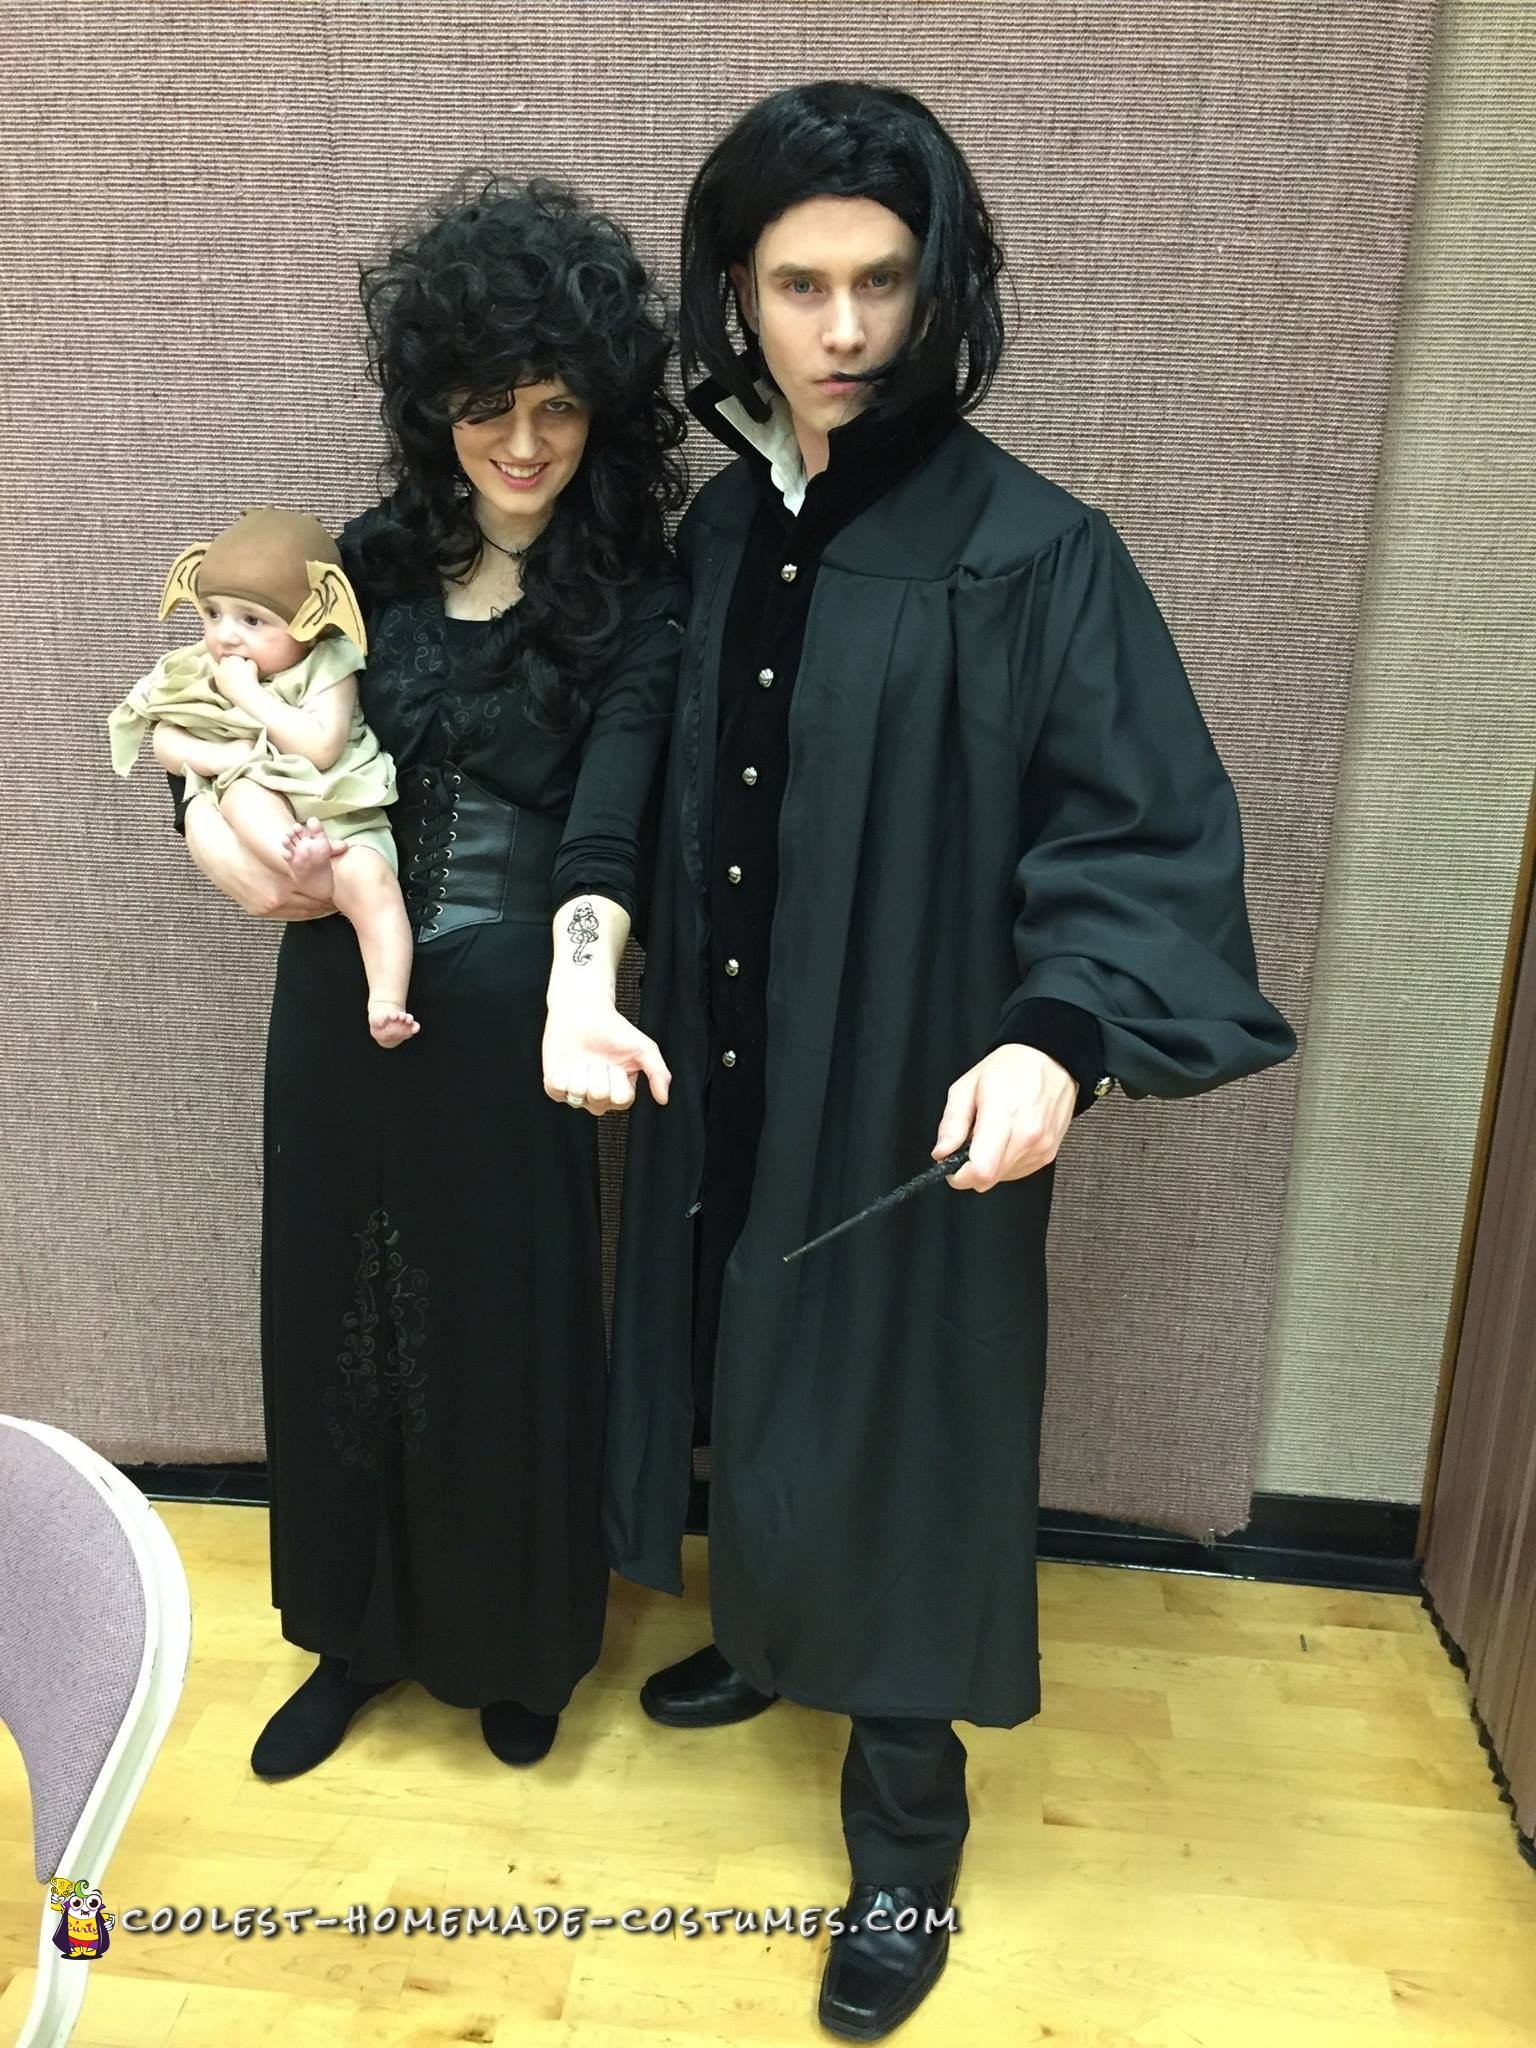 Snape, Bellatrix and Cuest Dobby the House Elf Costume Ever!